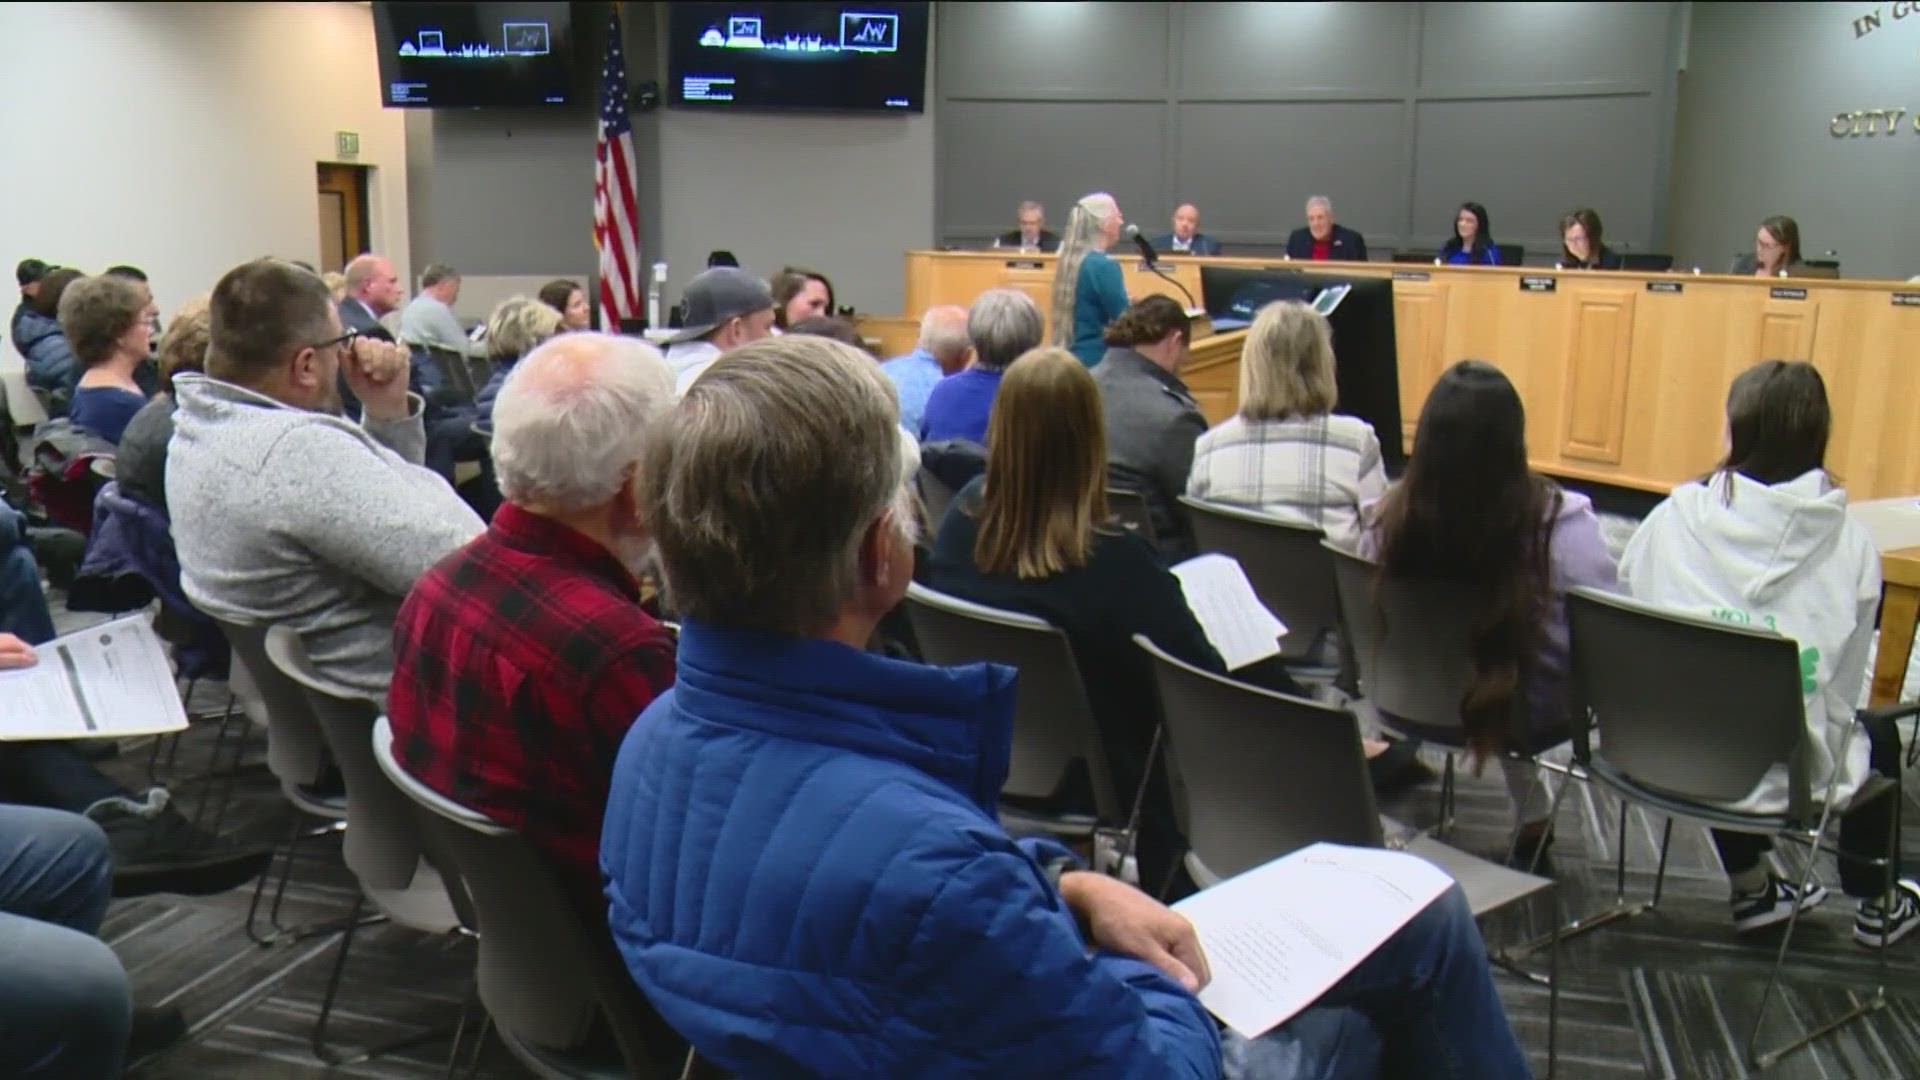 Before council members were sworn in at Tuesday's meeting, several community members aired concerns surrounding the appointment of David Bills to District 3.